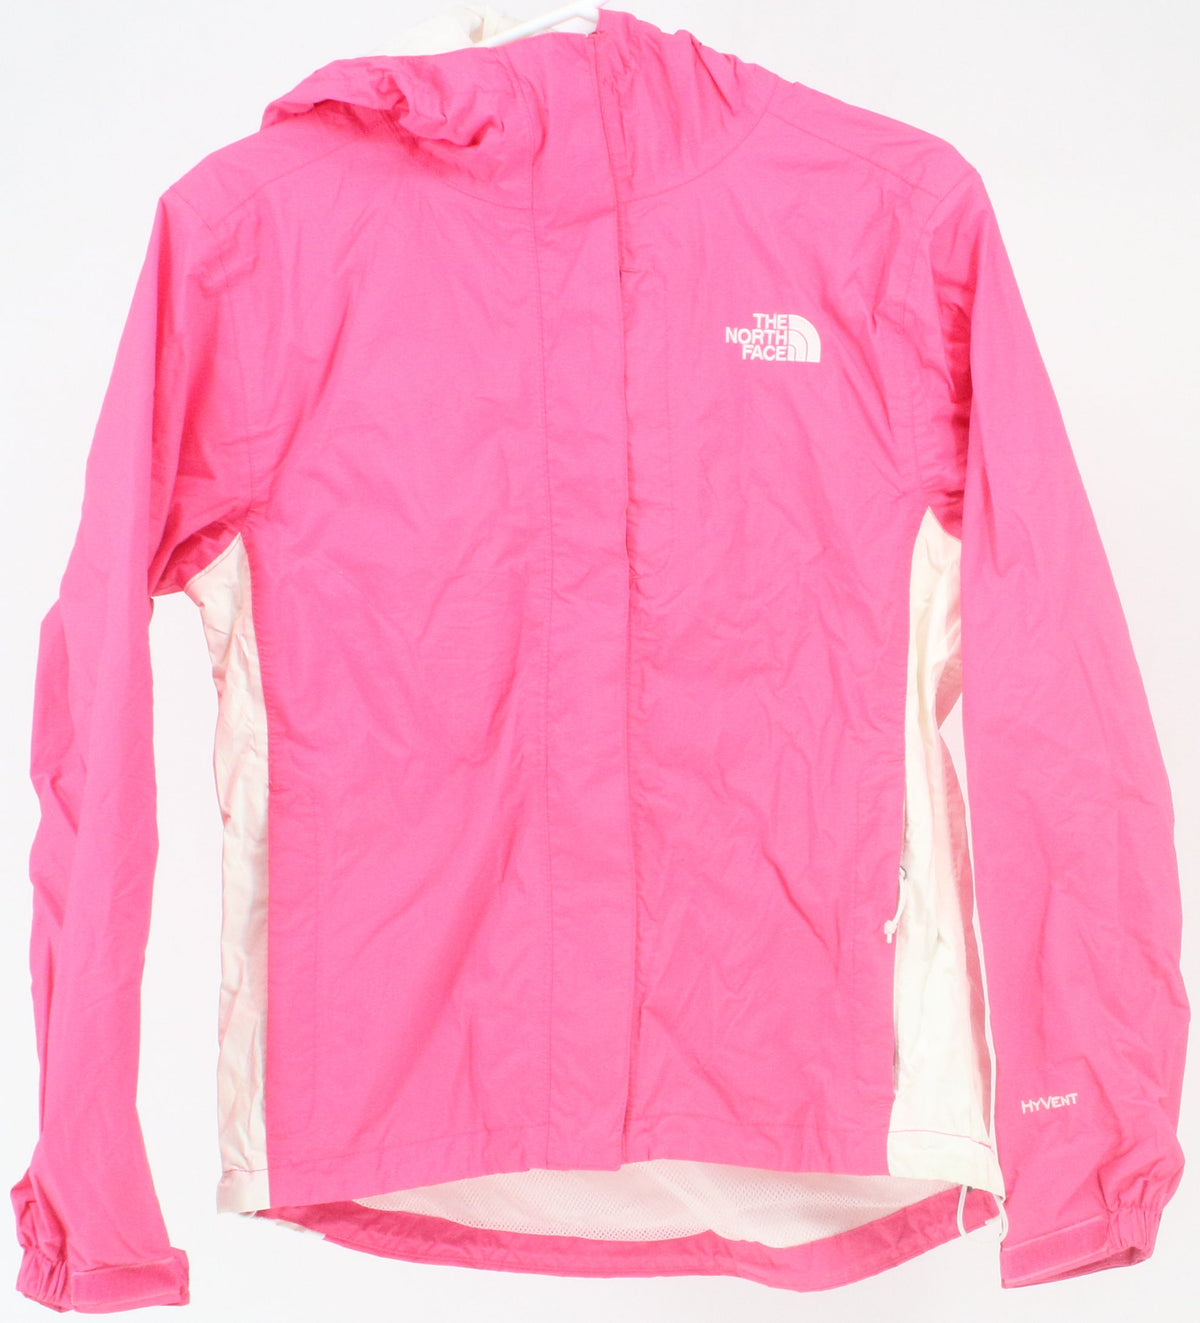 The North Face HyVent Pink and White Lightweight Women's Nylon Jacket